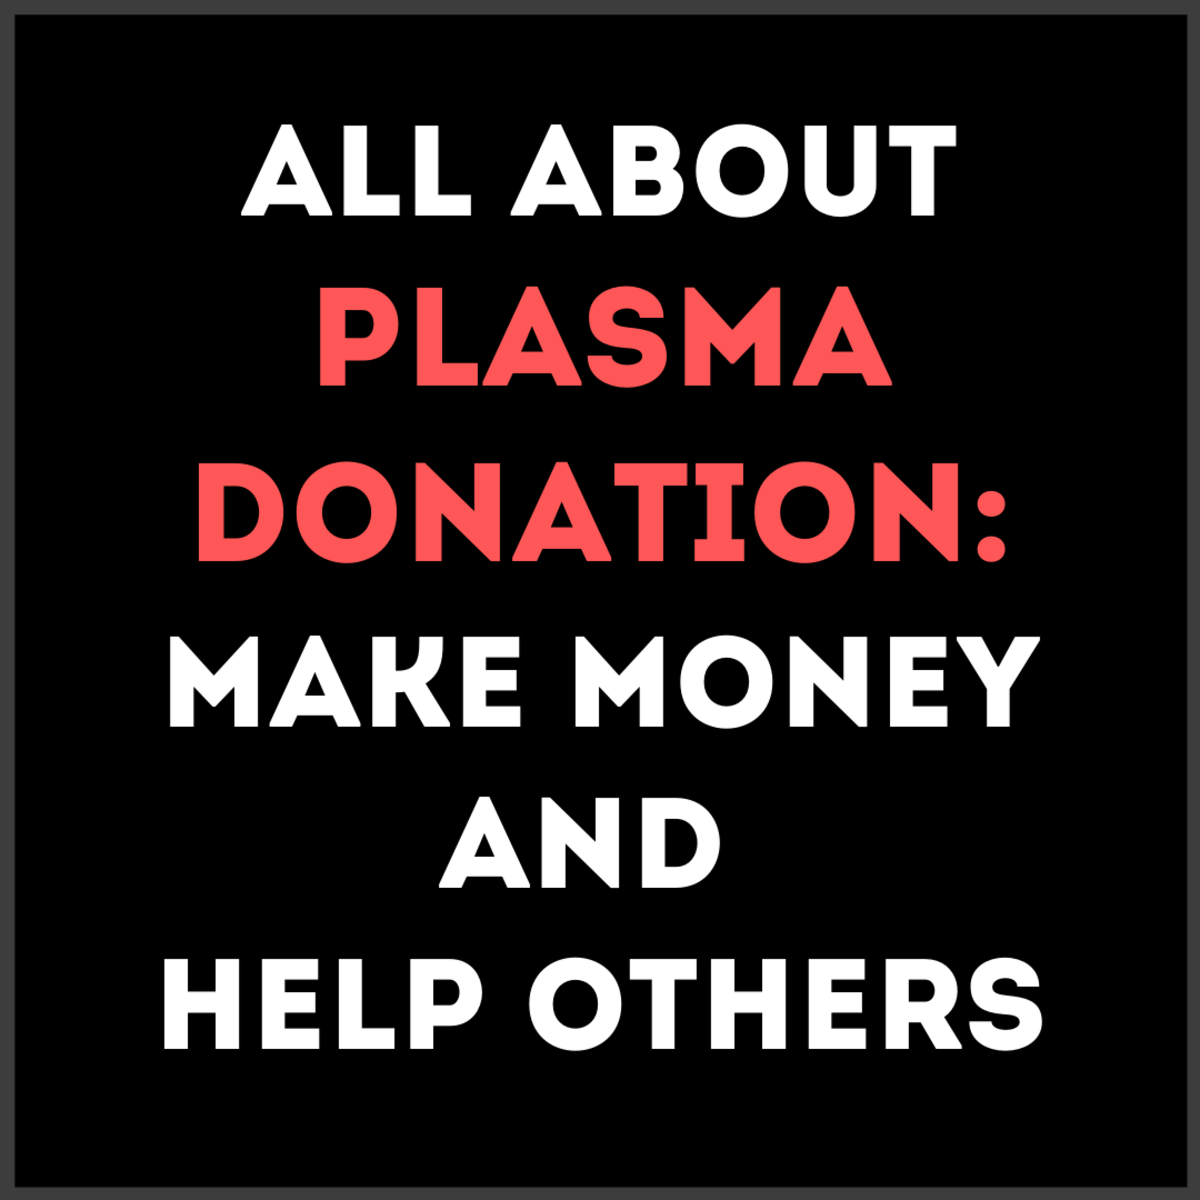 Find information about donating plasma, such as how it works, whether it hurts, and how much you get paid for donating.